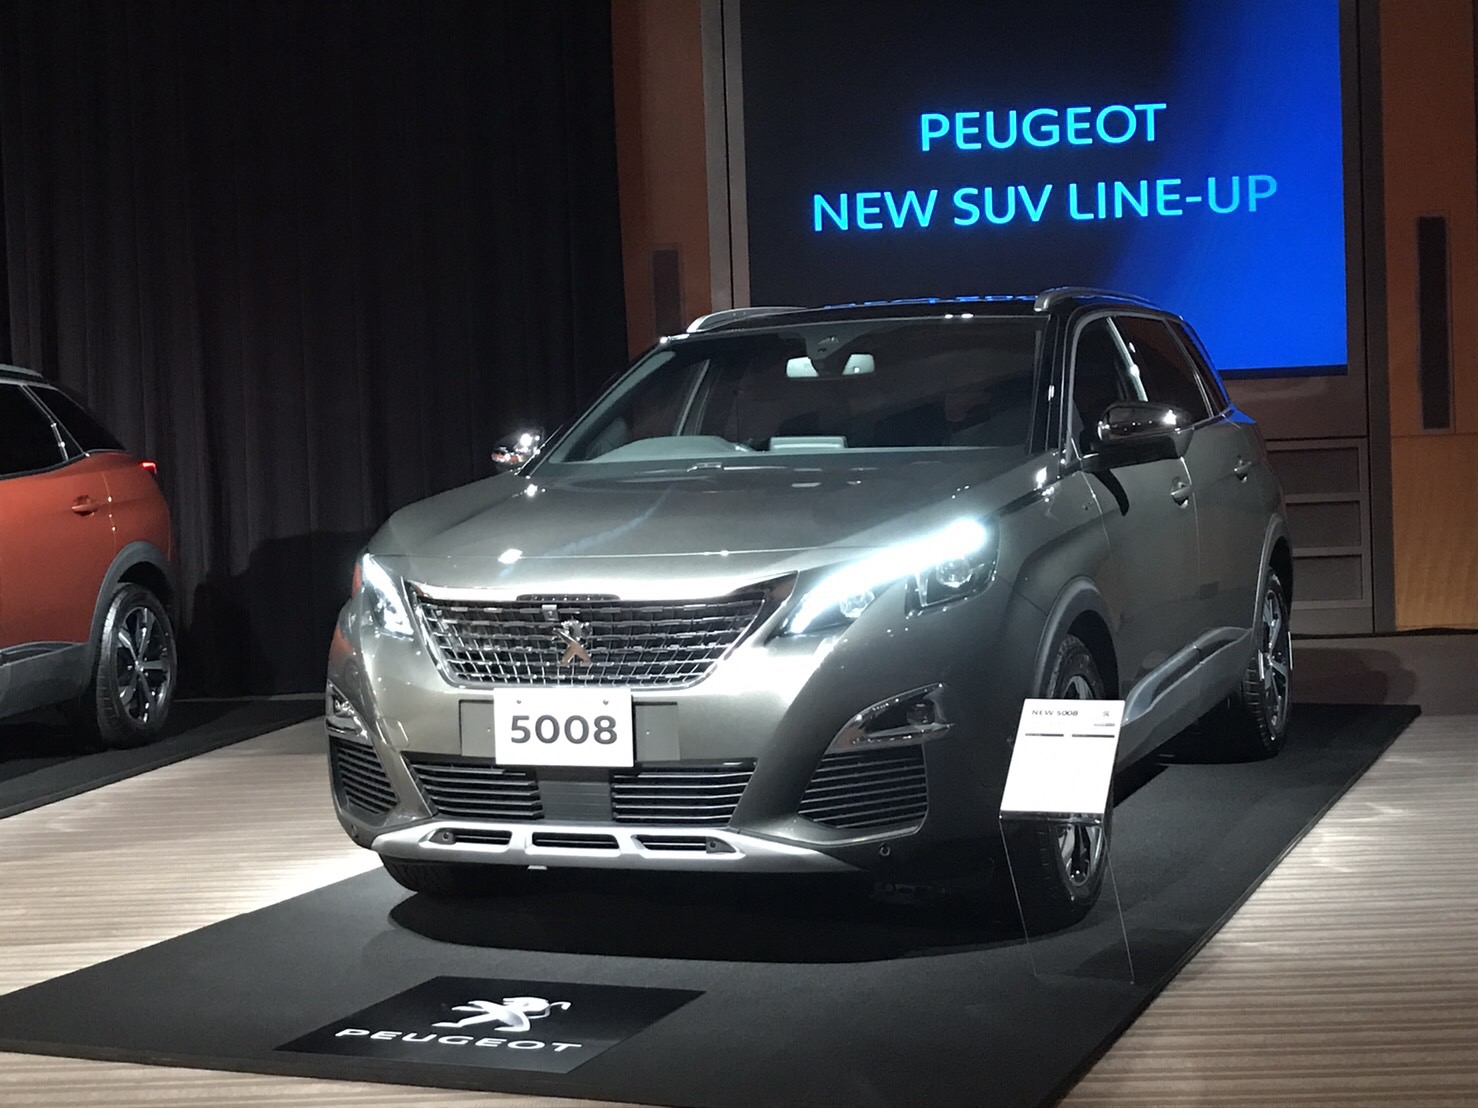 NEW SUV 5008 DEBUT☆”